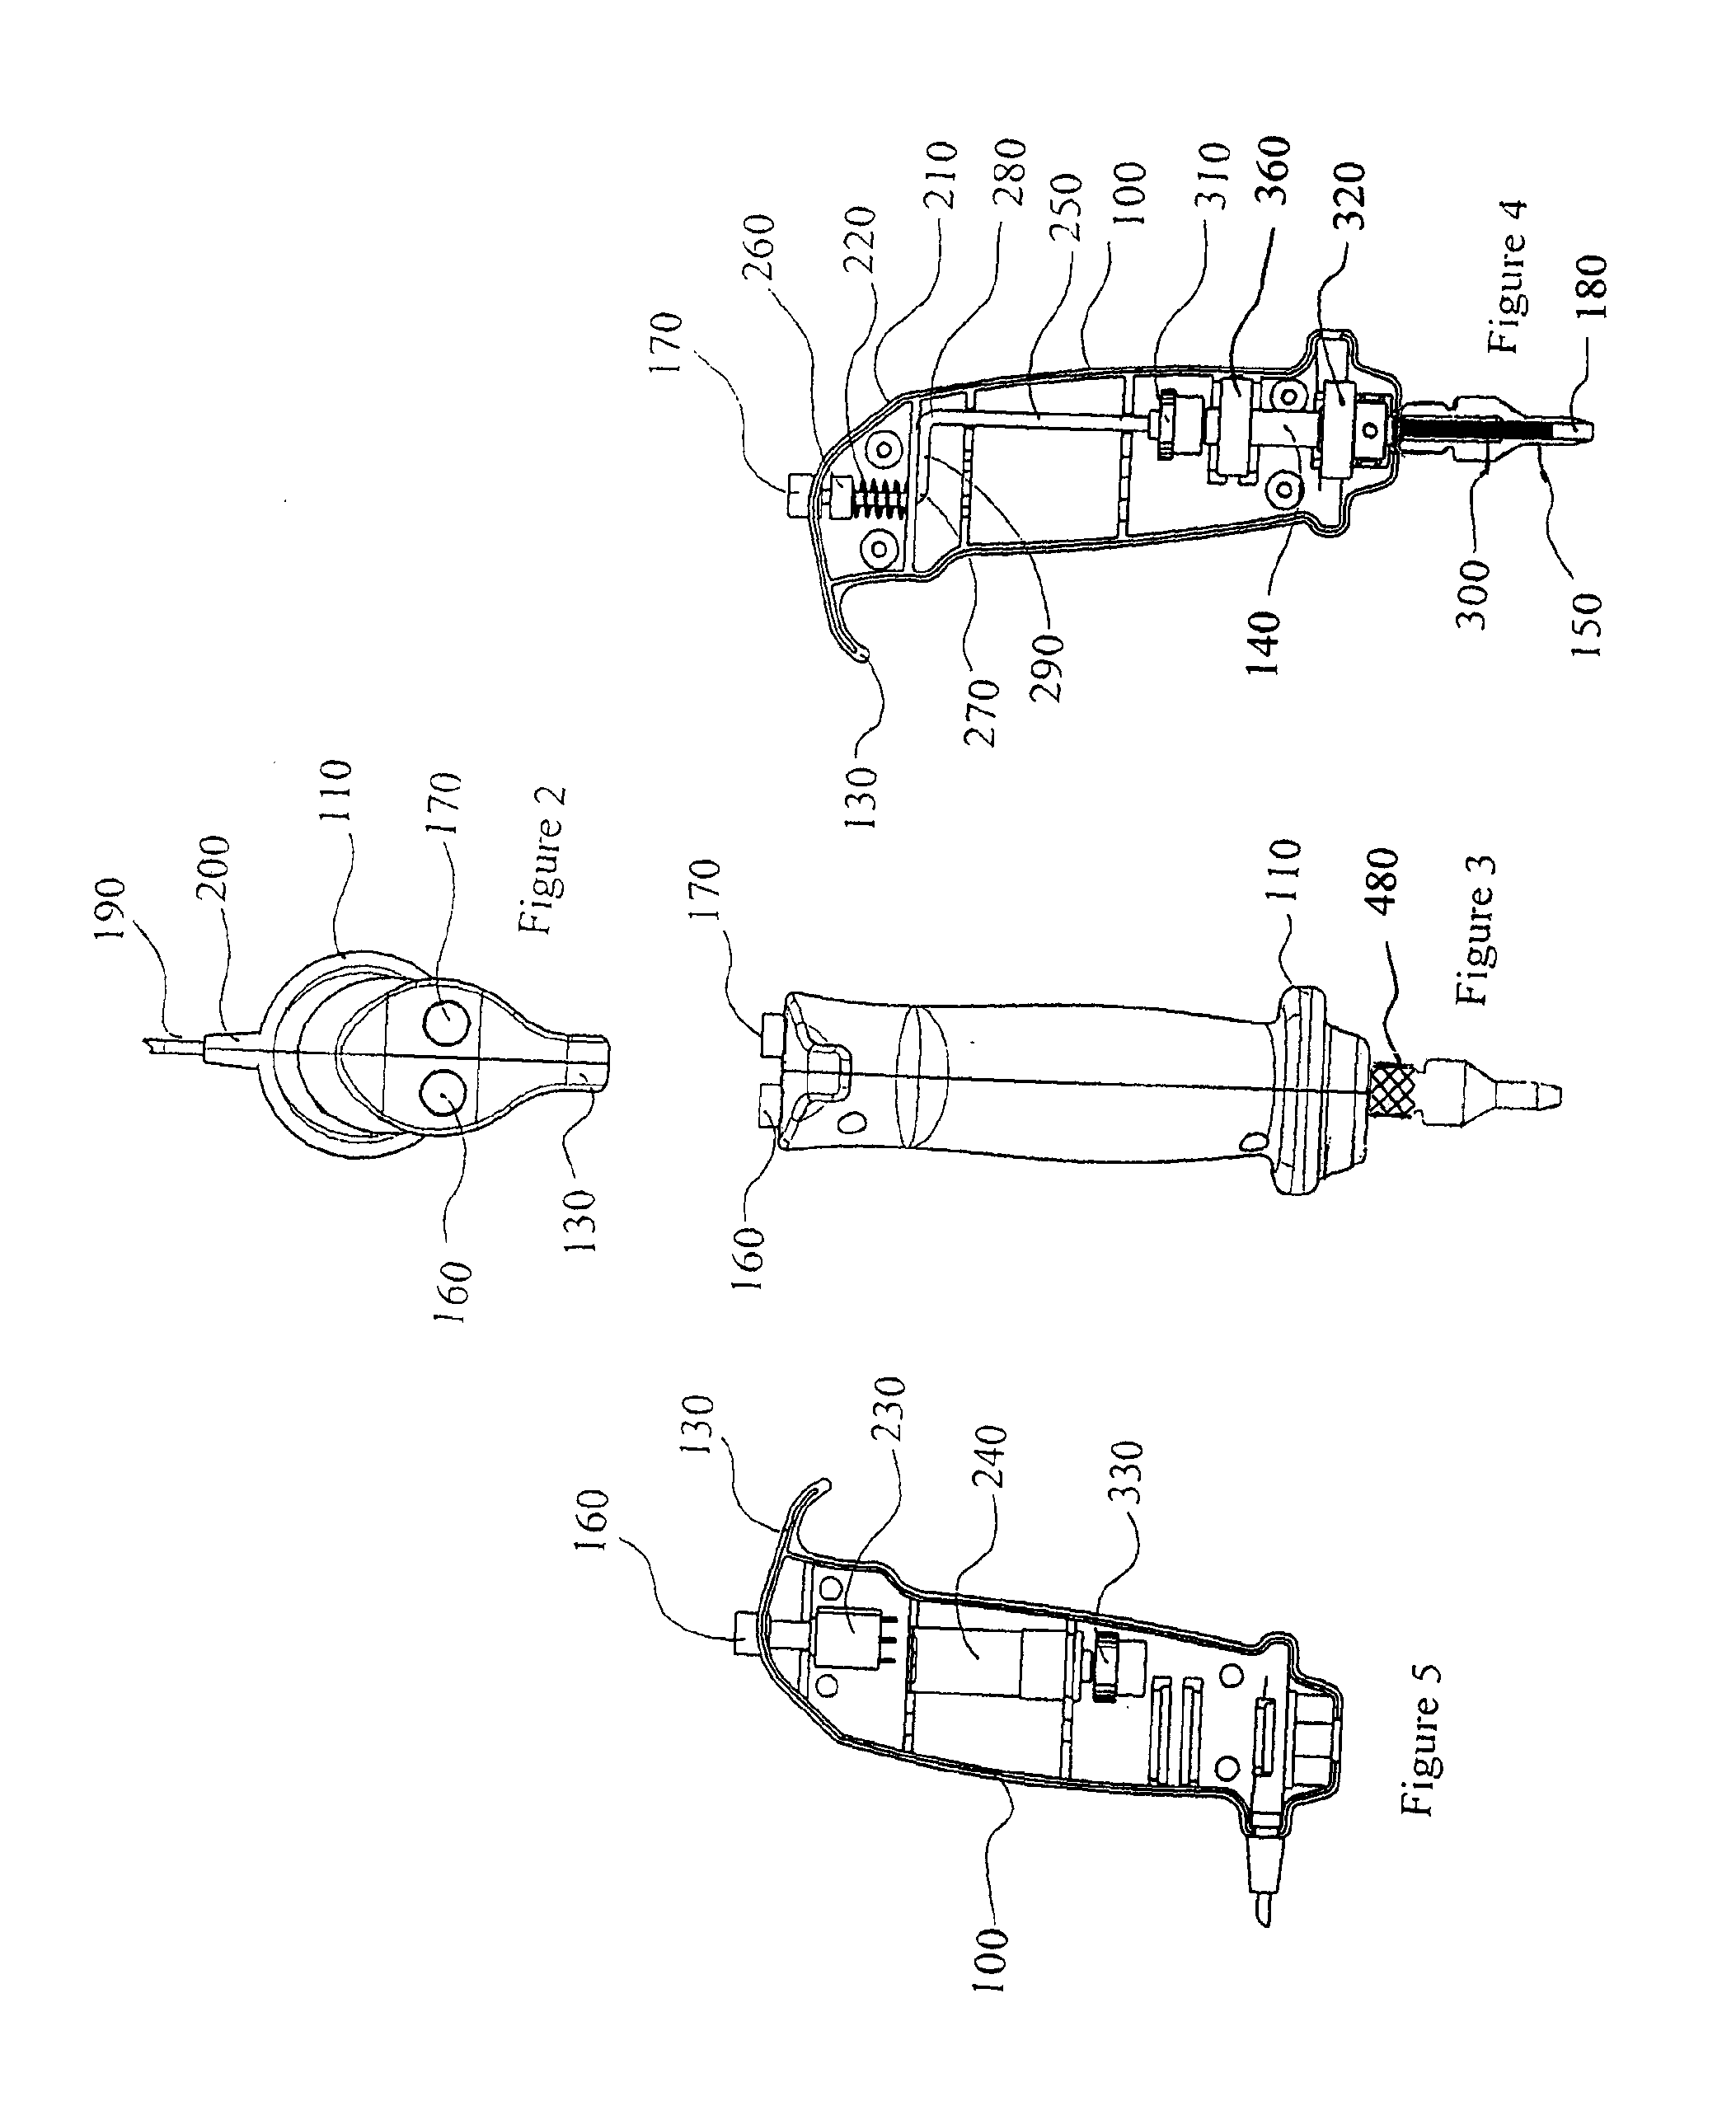 Motor driven rotational sampling apparatus with removable cutting tools for material collection